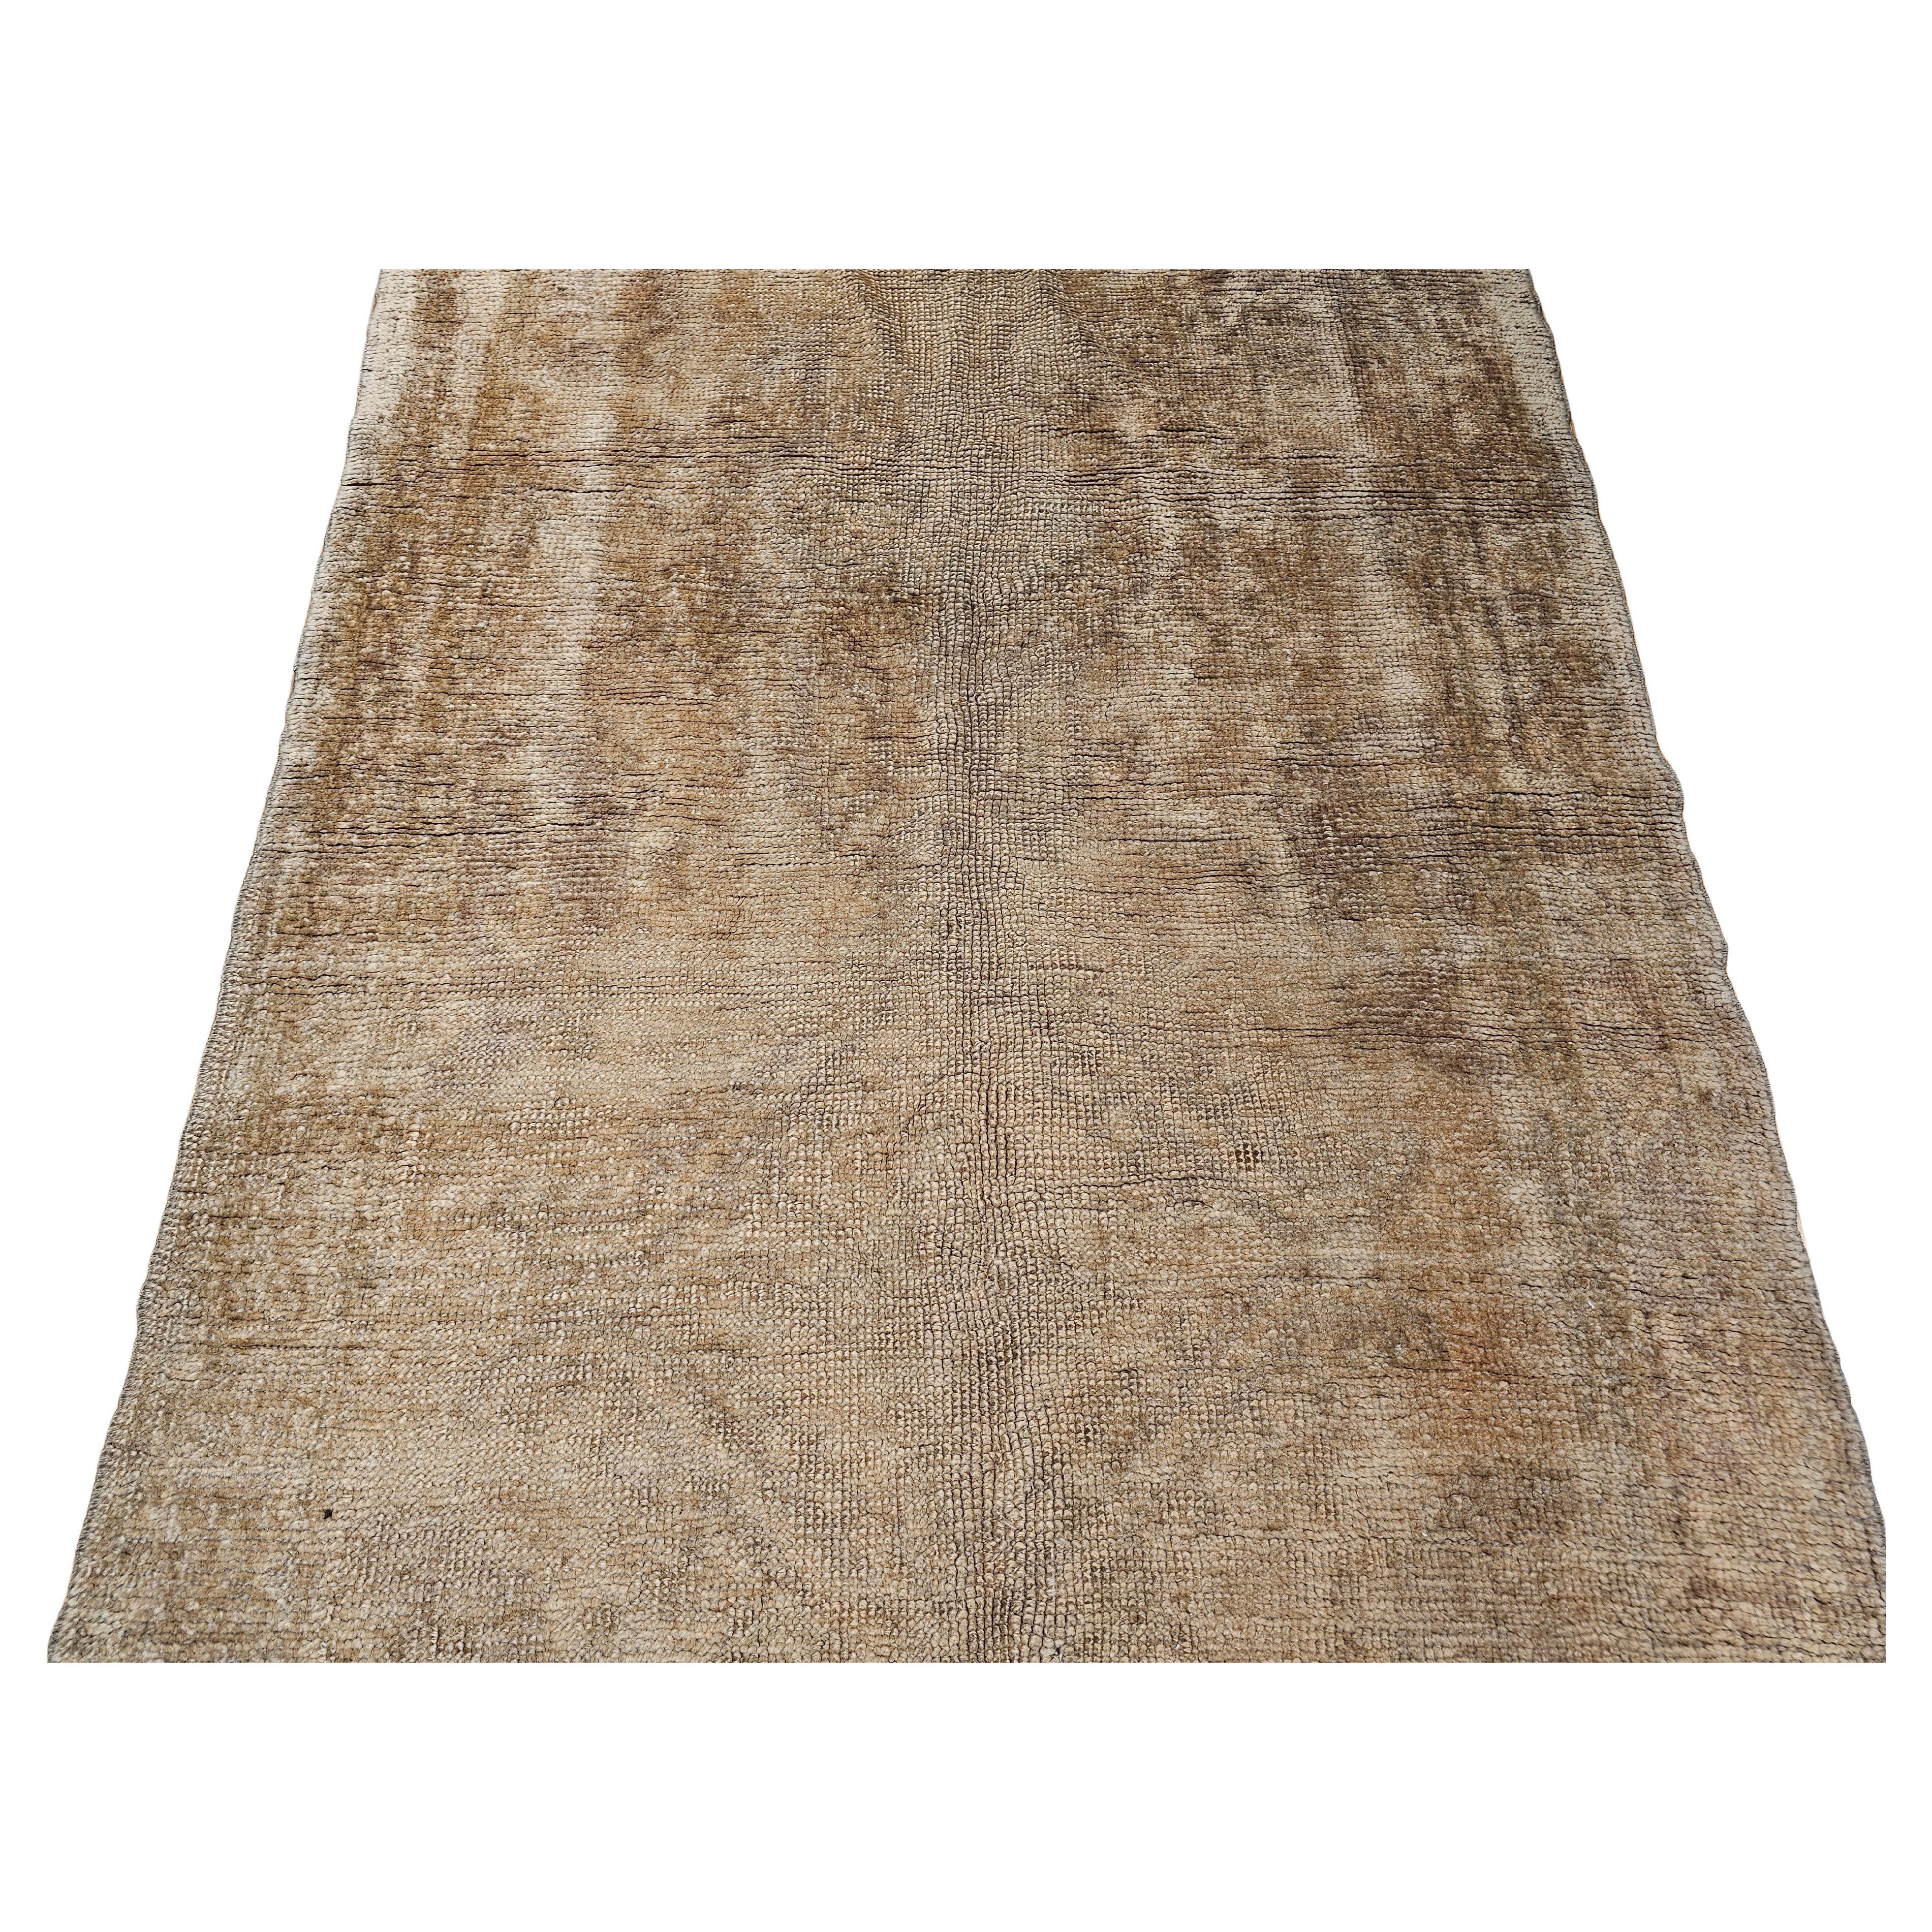 Vintage Turkish Oushak Wide Runner in an All-Over Open Pattern in Taupe, Ecru